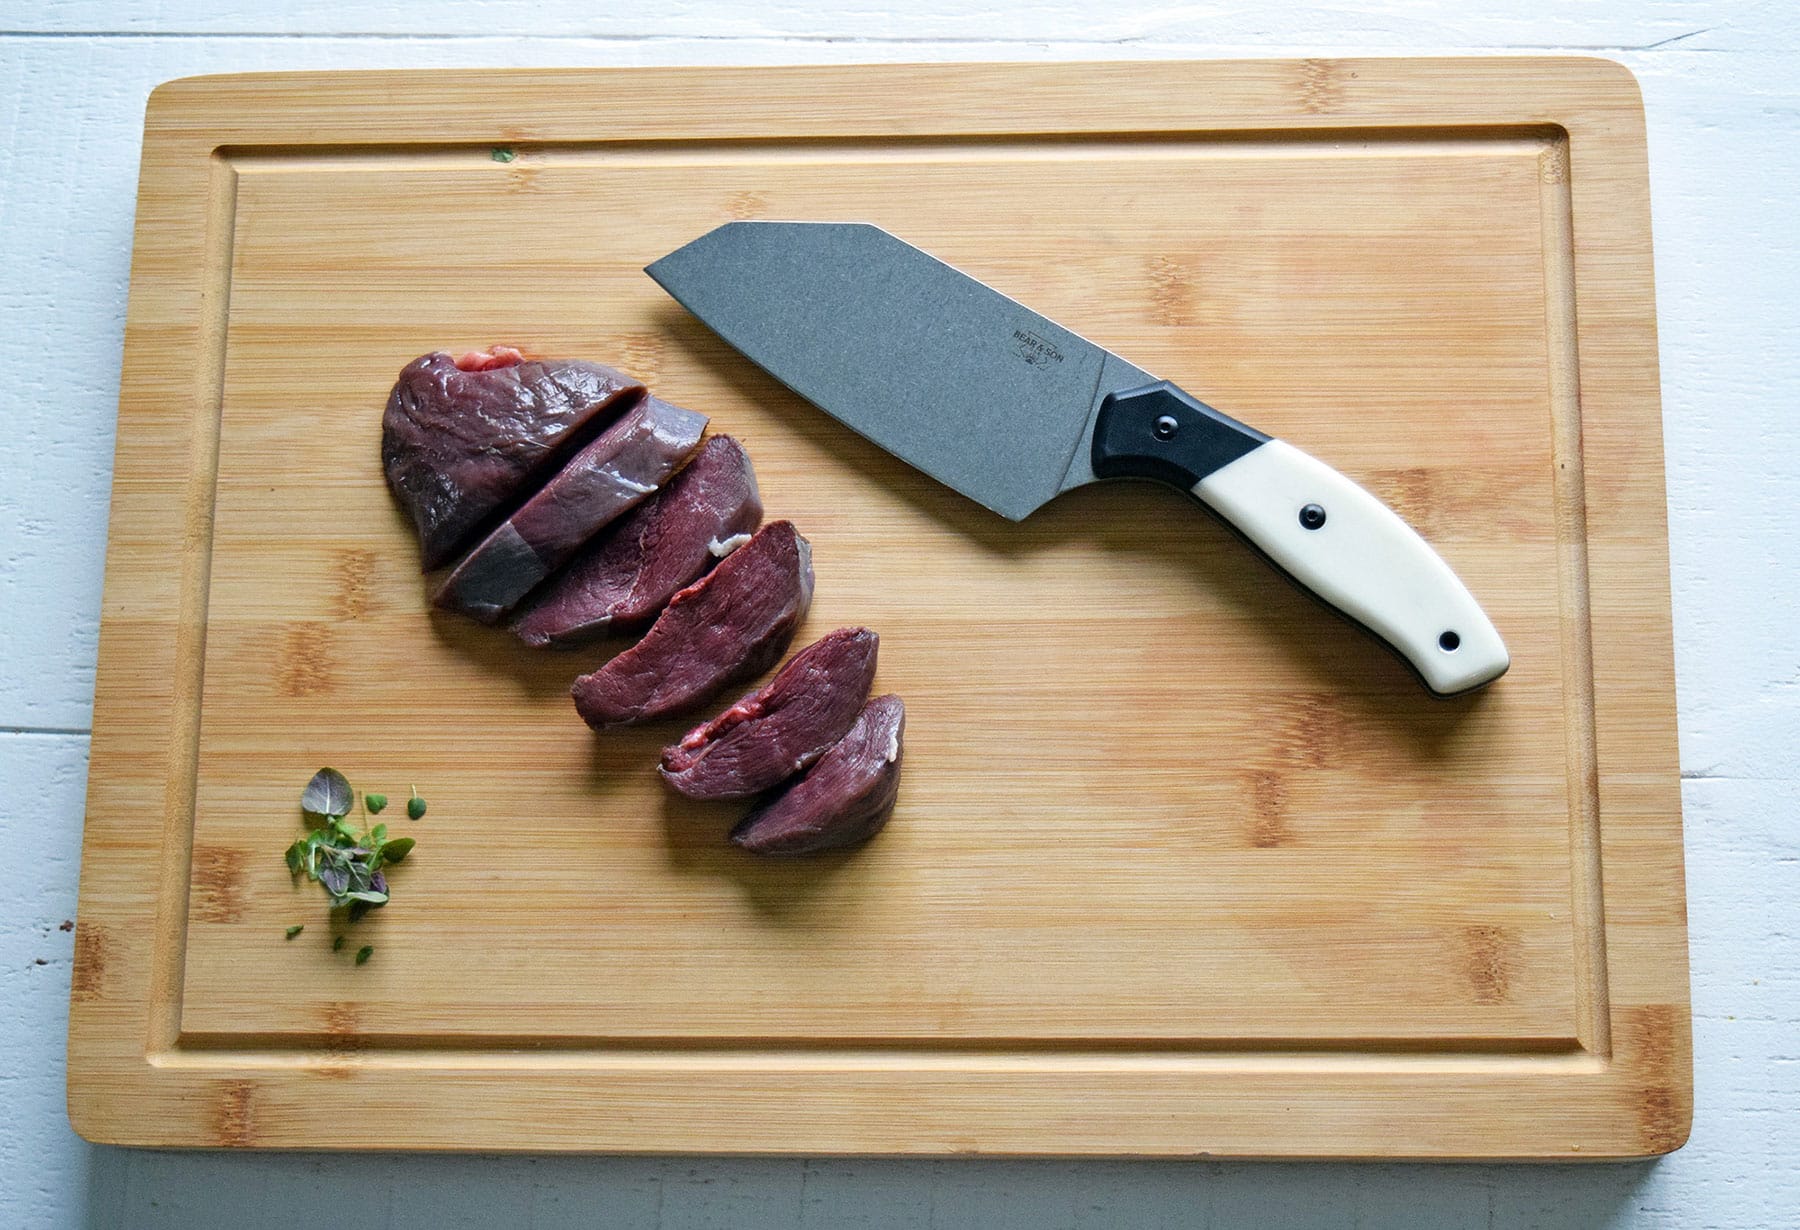 The Professional Chopper is an ideal cleaver for processing meat. 